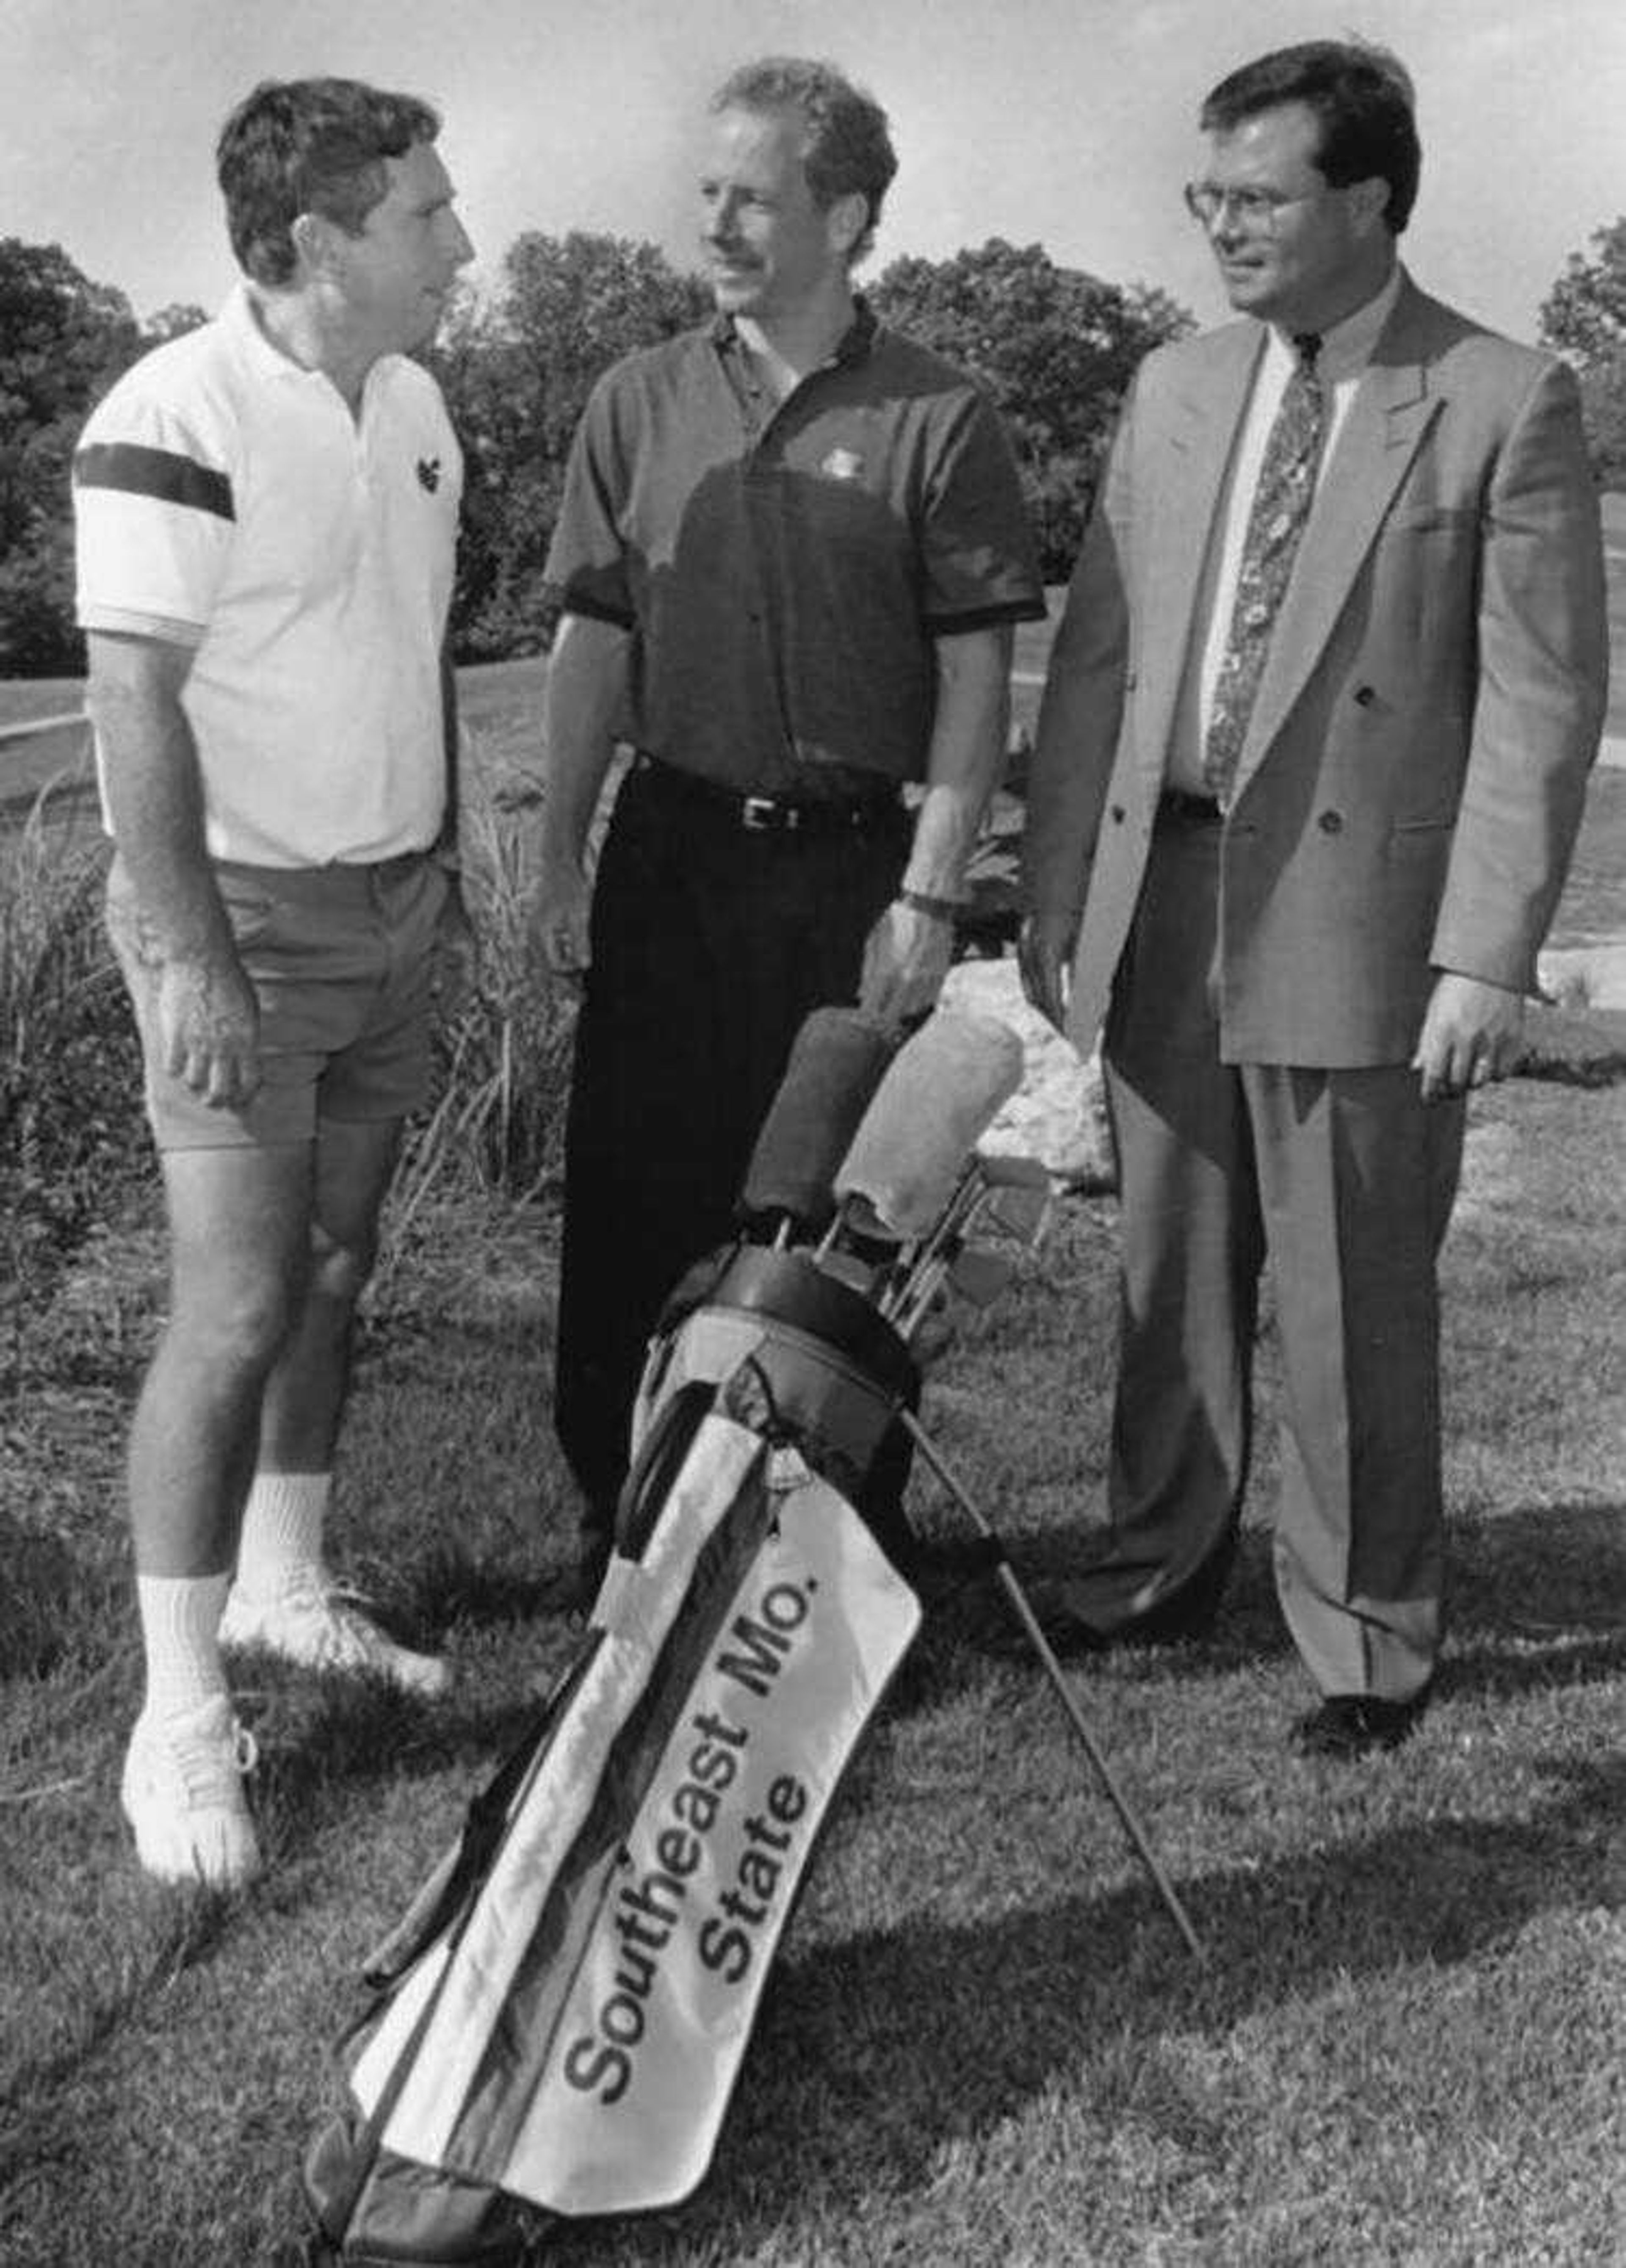 SEMO had a golf team? A look back at teams of the past